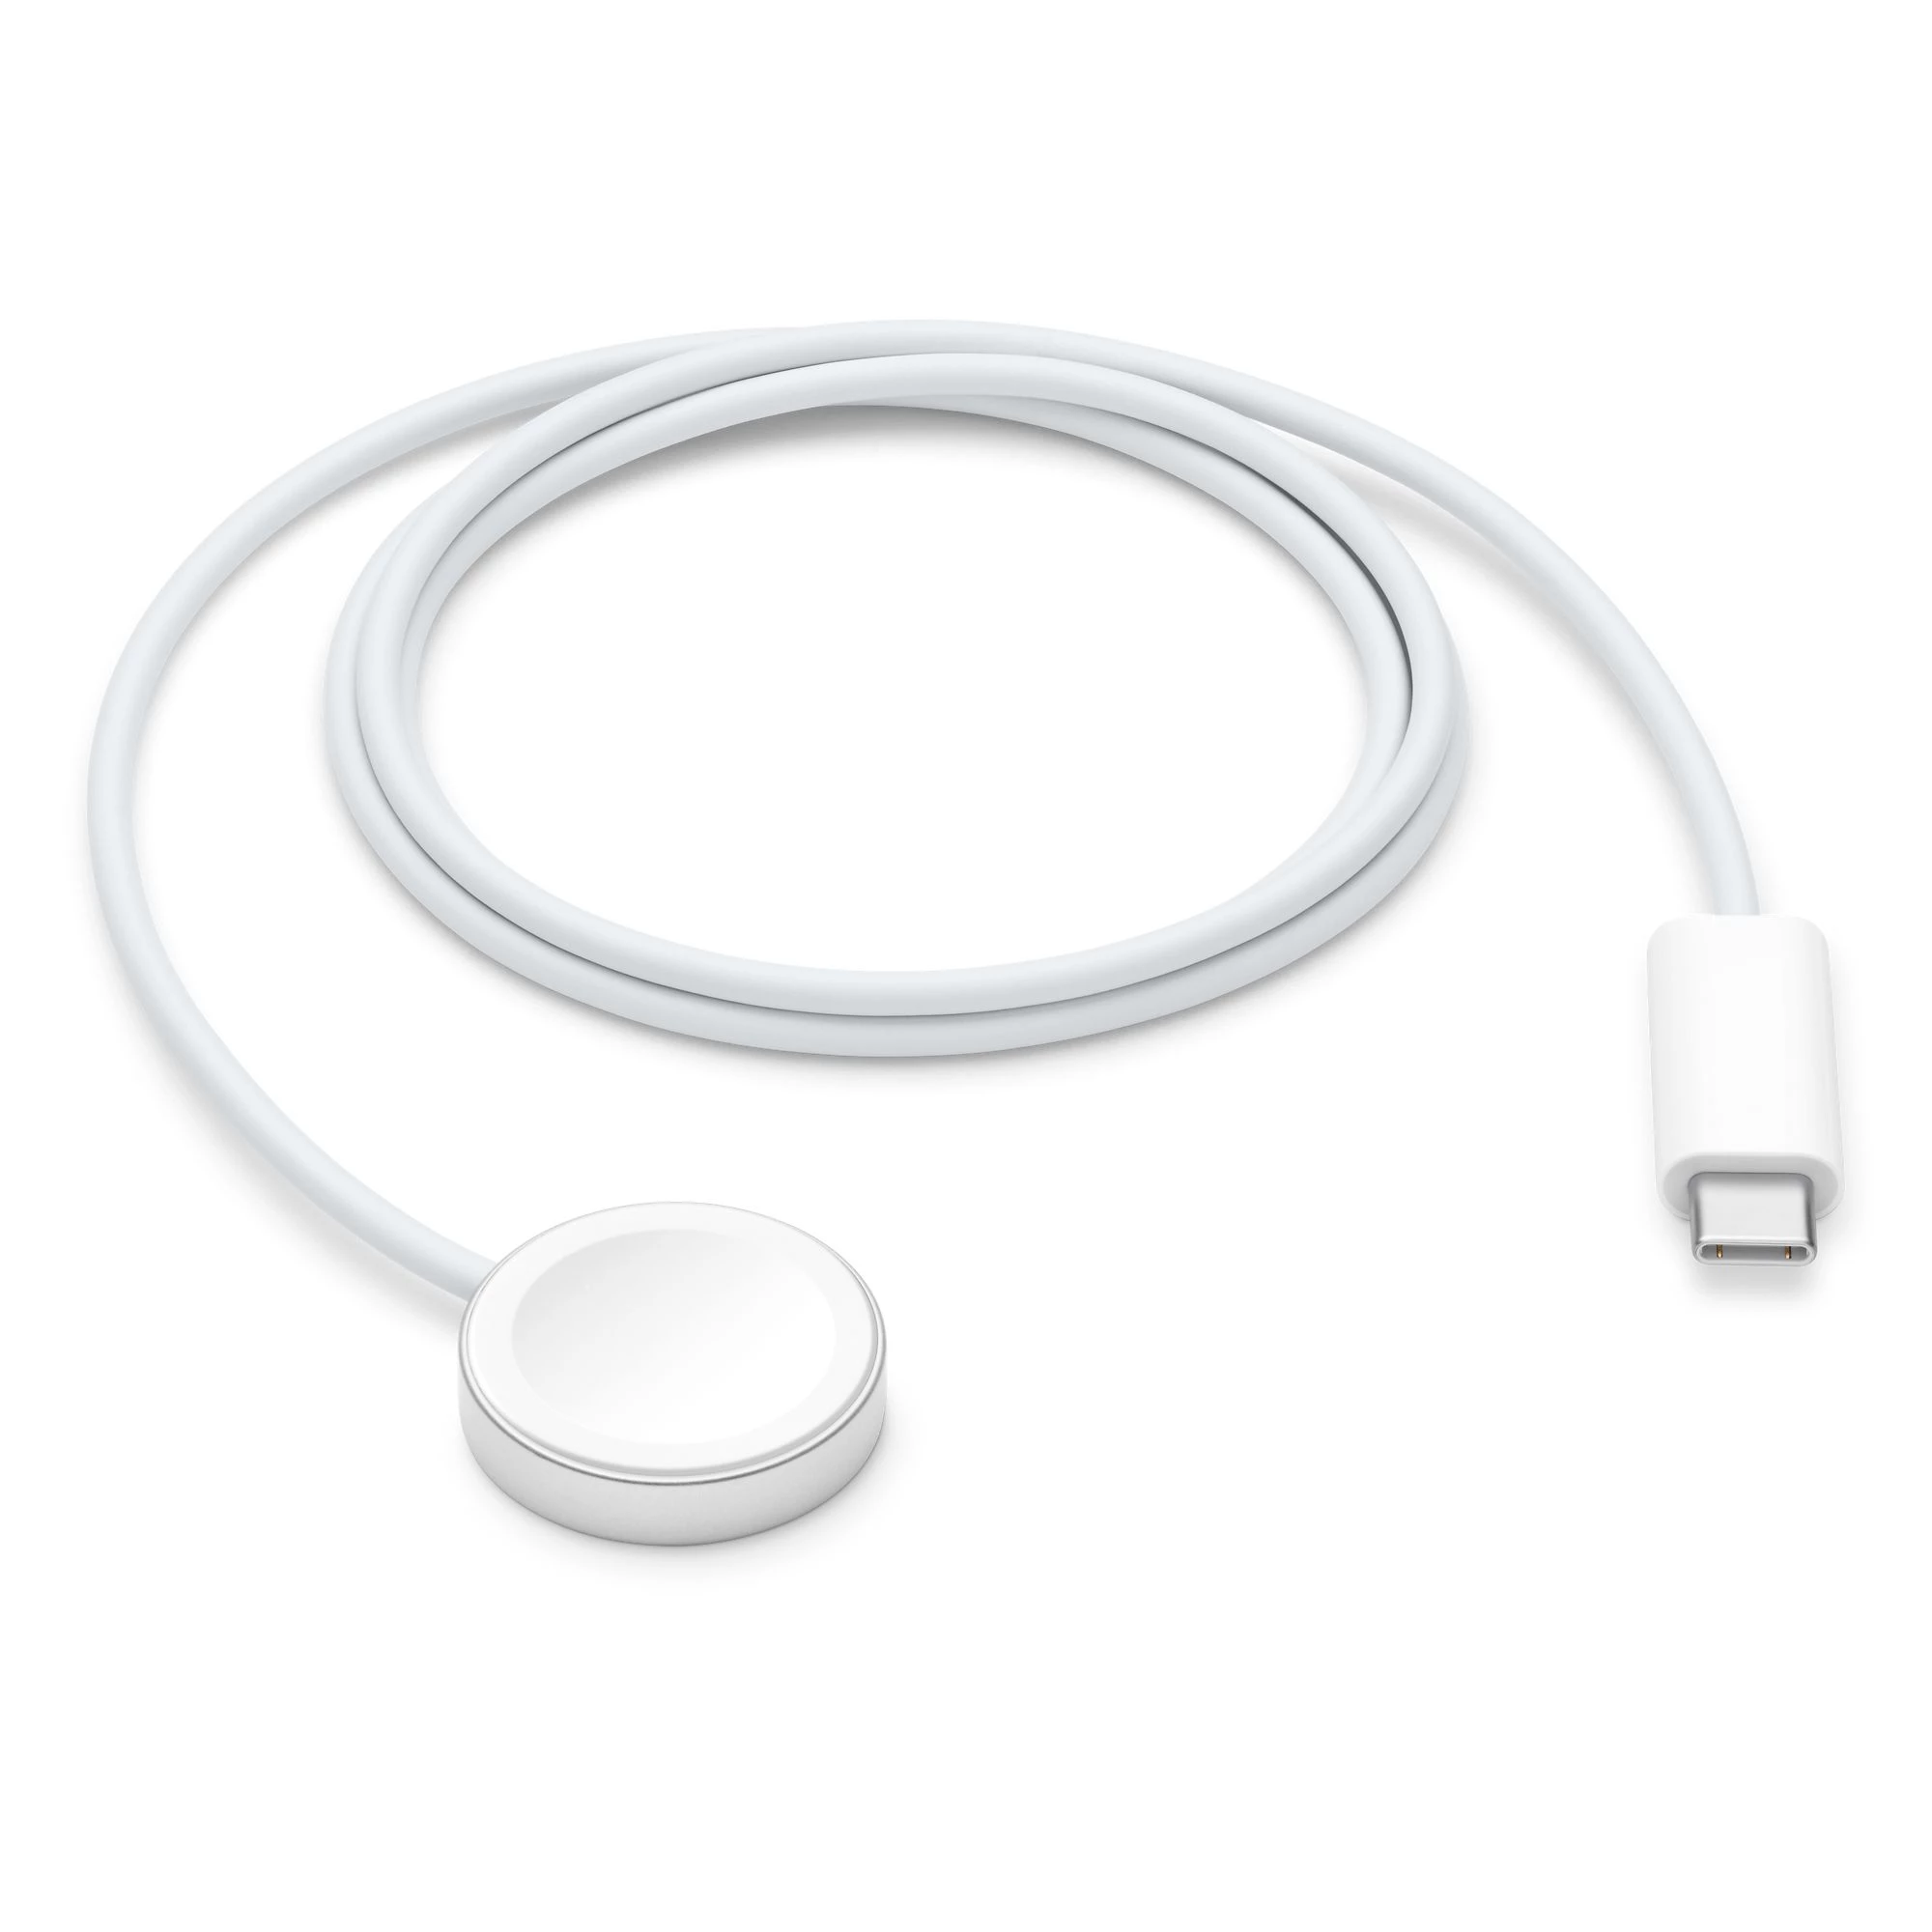 NO BOX Apple Watch Magnetic Fast Charger to USB-C Cable (1 m) (MLWJ3) (з комплекту Apple Watch)